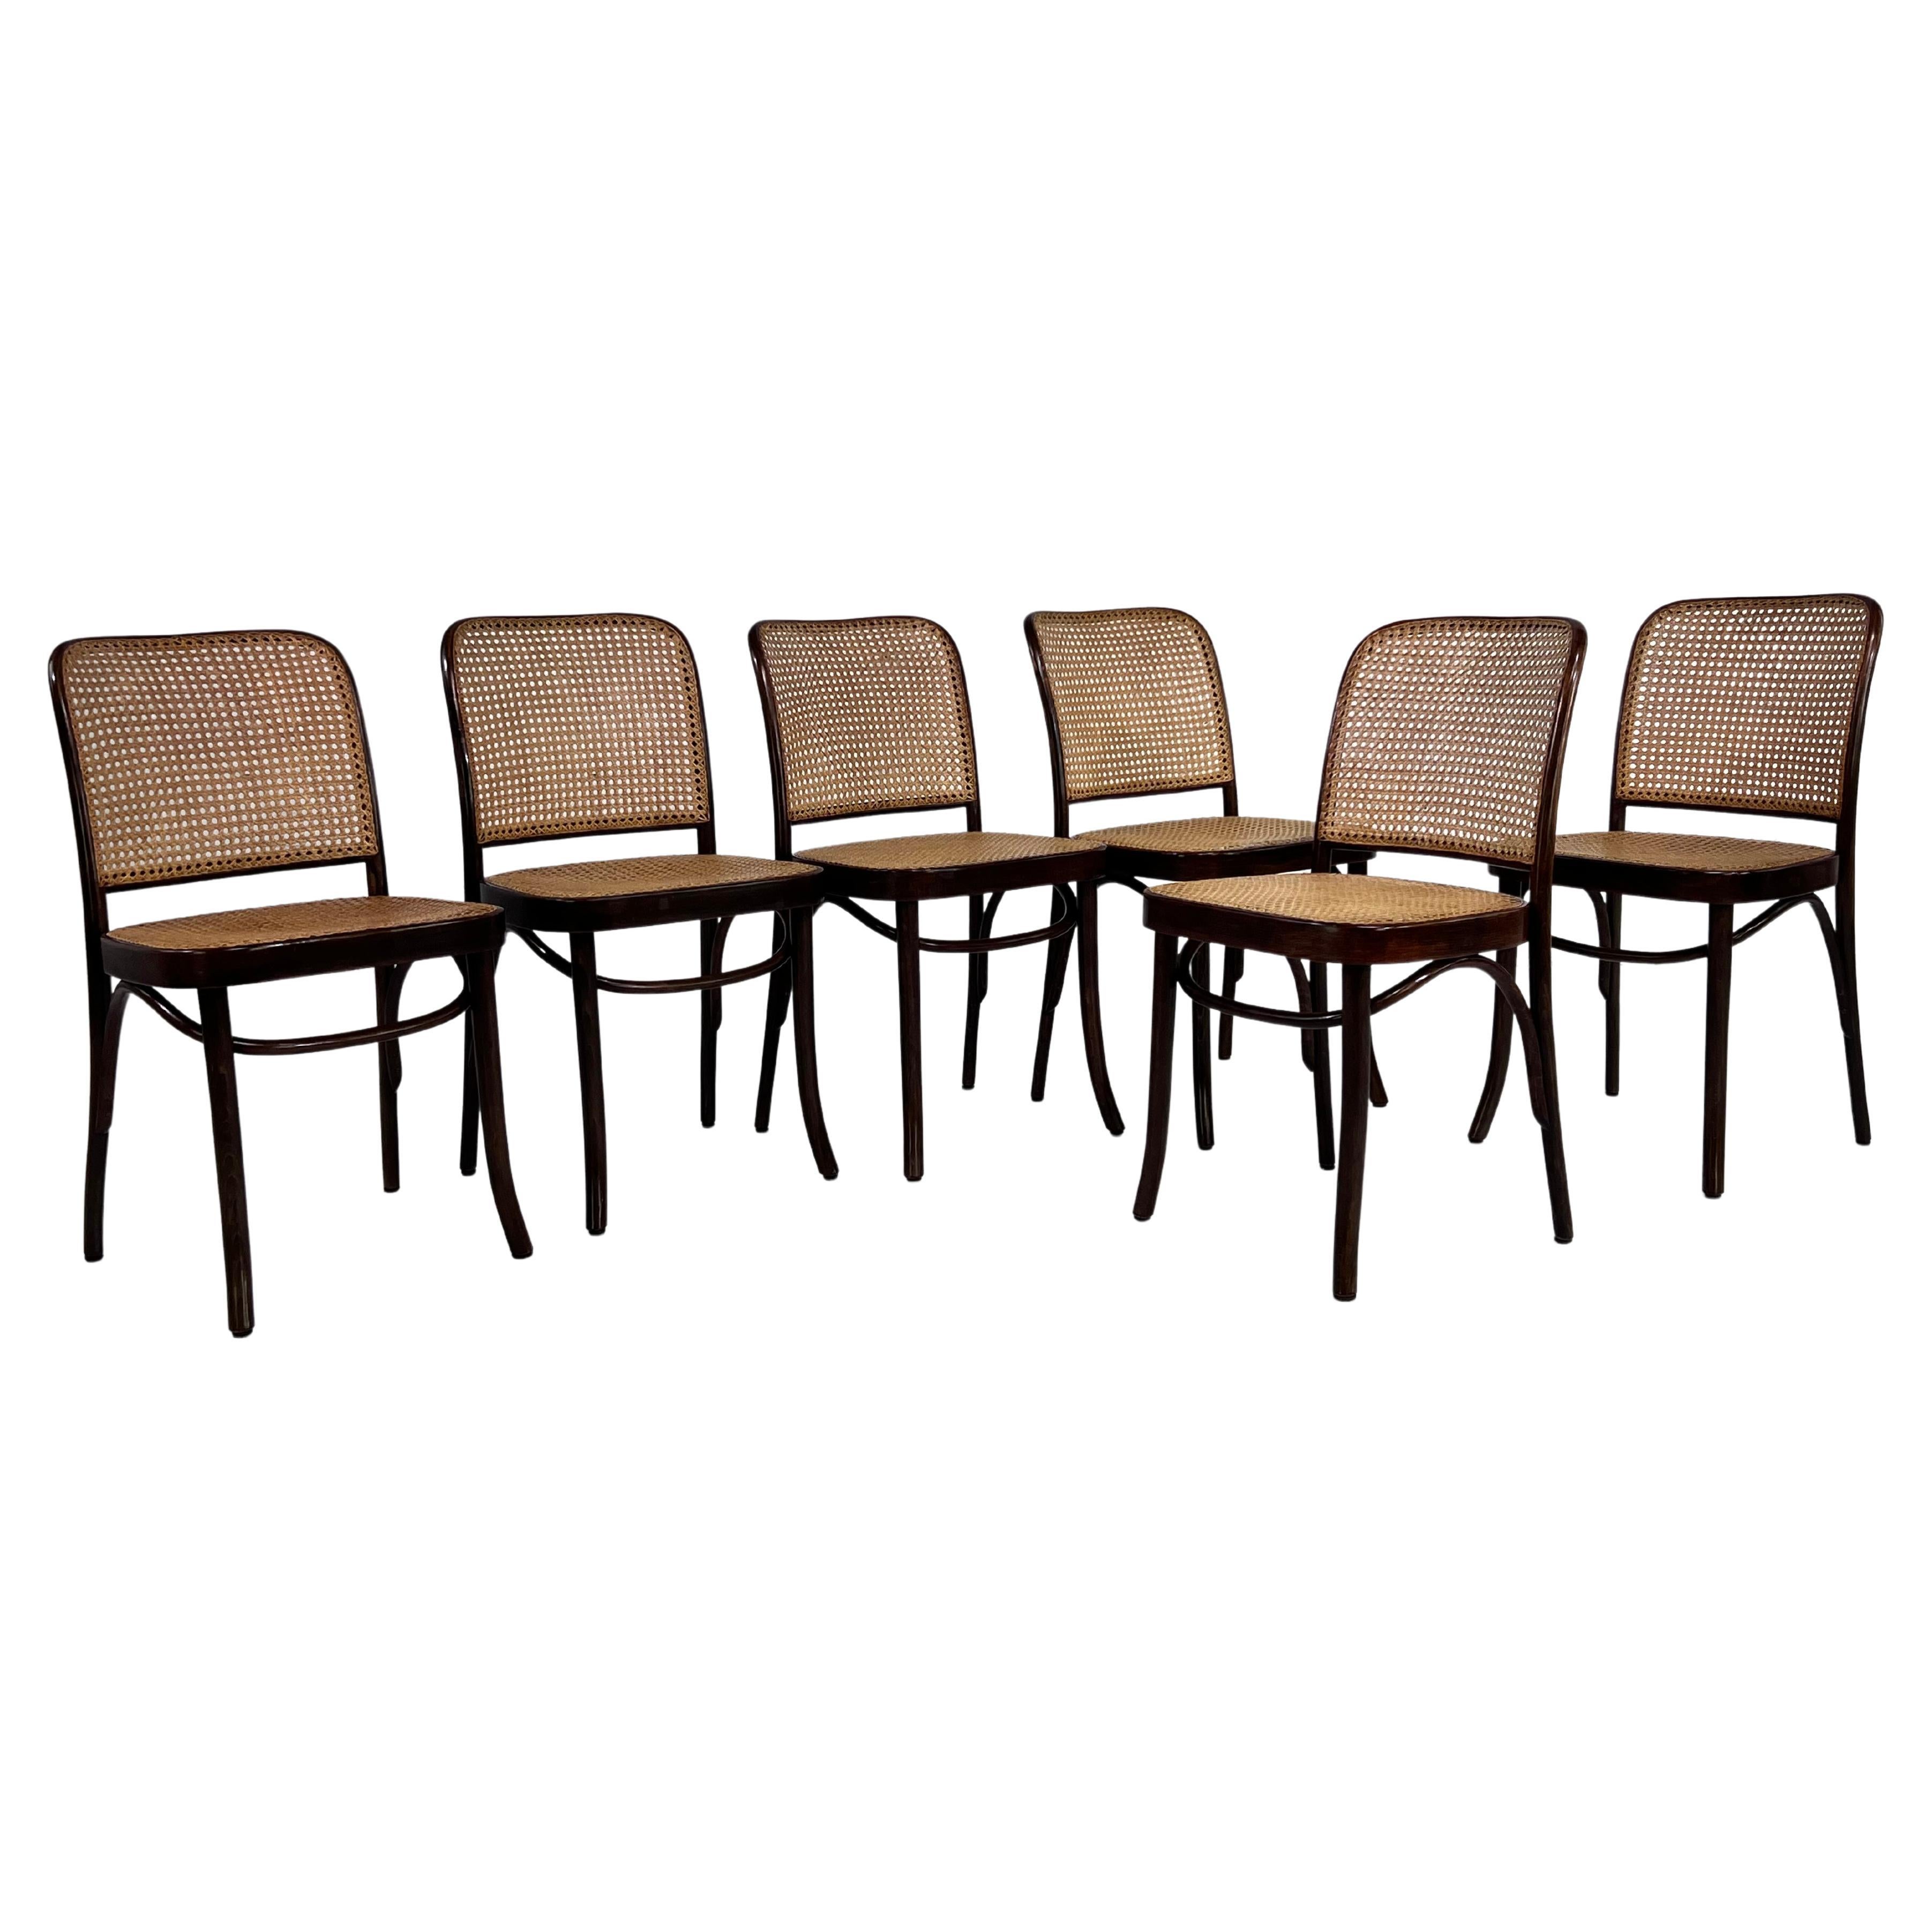 1920s Josef Hoffman Bentwood and Cane Set of 6 Chairs Prague Model for Thonet